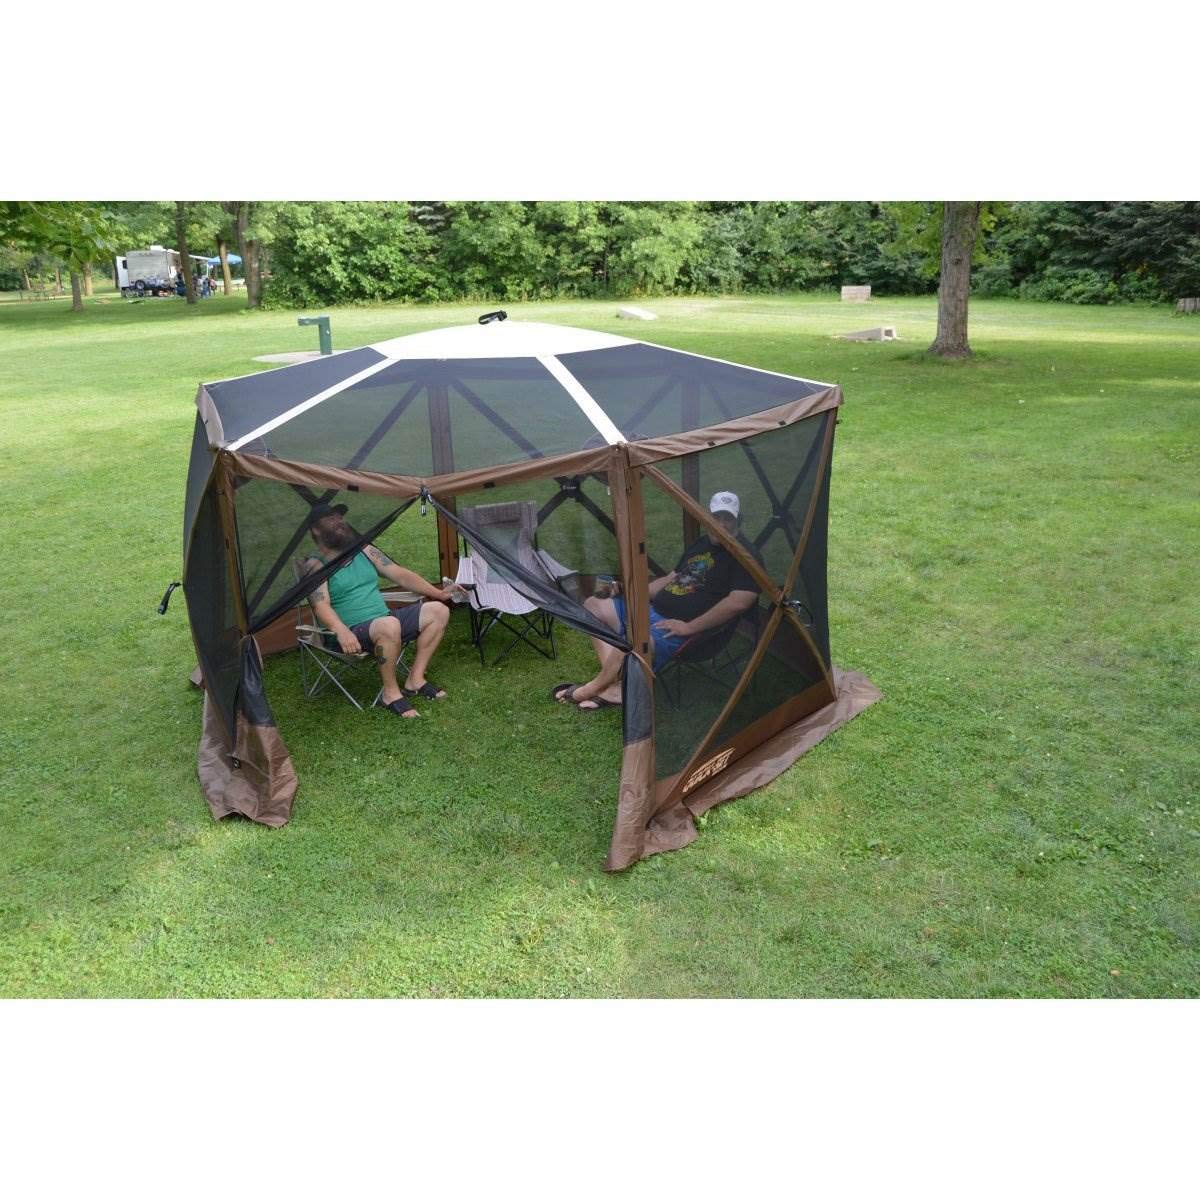 CLAM Quick-Set Escape Sky Screen 11.5 x 11.5 Foot Portable Pop-Up Outdoor Camping Gazebo Screen Tent for Parties with Ground Stakes & Carry Bag, Brown